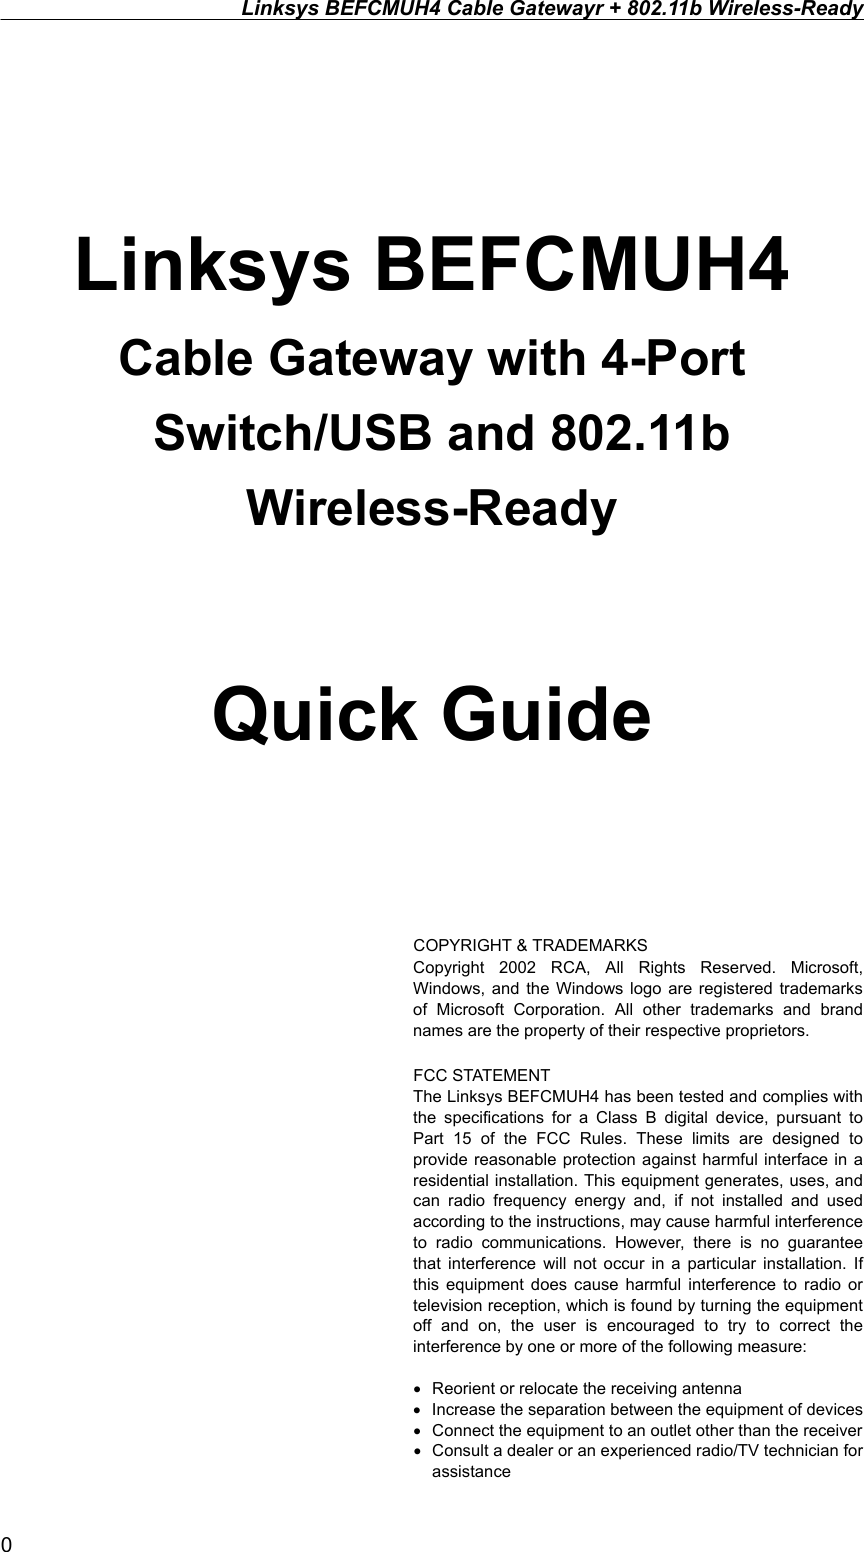 Linksys BEFCMUH4 Cable Gatewayr + 802.11b Wireless-Ready    Linksys BEFCMUH4 Cable Gateway with 4-Port           Switch/USB and 802.11b Wireless-Ready  Quick Guide    COPYRIGHT &amp; TRADEMARKS Copyright 2002 RCA, All Rights Reserved. Microsoft, Windows, and the Windows logo are registered trademarks of Microsoft Corporation. All other trademarks and brand names are the property of their respective proprietors.  FCC STATEMENT The Linksys BEFCMUH4 has been tested and complies with the specifications for a Class B digital device, pursuant to Part 15 of the FCC Rules. These limits are designed to provide reasonable protection against harmful interface in a residential installation. This equipment generates, uses, and can radio frequency energy and, if not installed and used according to the instructions, may cause harmful interference to radio communications. However, there is no guarantee that interference will not occur in a particular installation. If this equipment does cause harmful interference to radio or television reception, which is found by turning the equipment off and on, the user is encouraged to try to correct the interference by one or more of the following measure:  •  Reorient or relocate the receiving antenna •  Increase the separation between the equipment of devices •  Connect the equipment to an outlet other than the receiver   •  Consult a dealer or an experienced radio/TV technician for assistance 0 